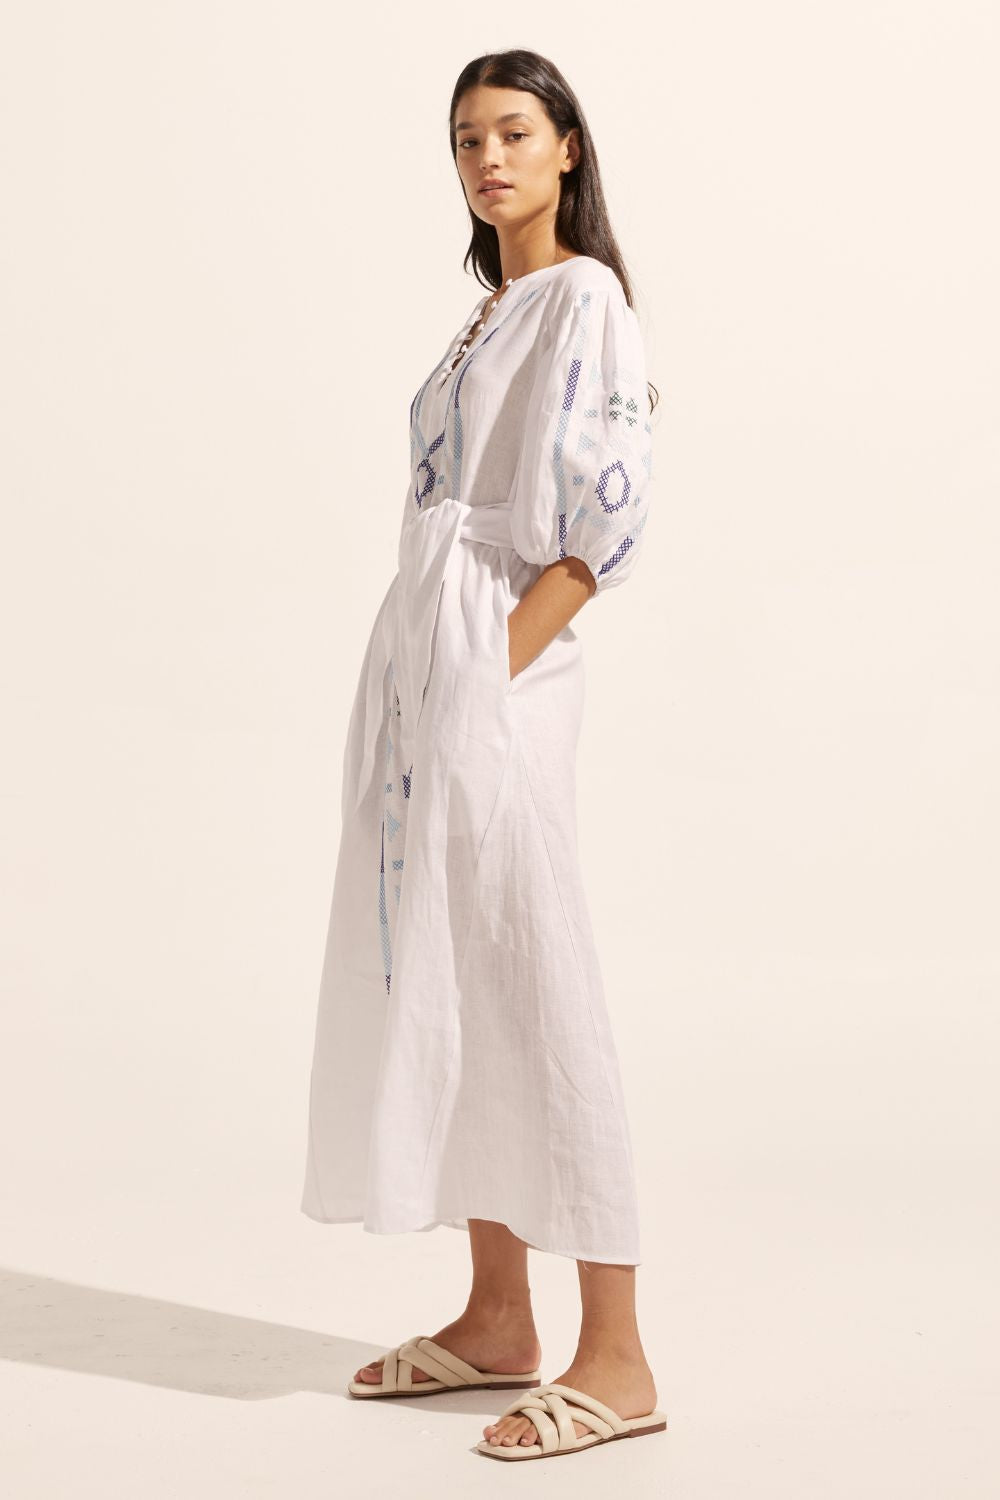 white and blue, maxi dress, embroidery, mid length sleeve, self tie fabric belt, side view image